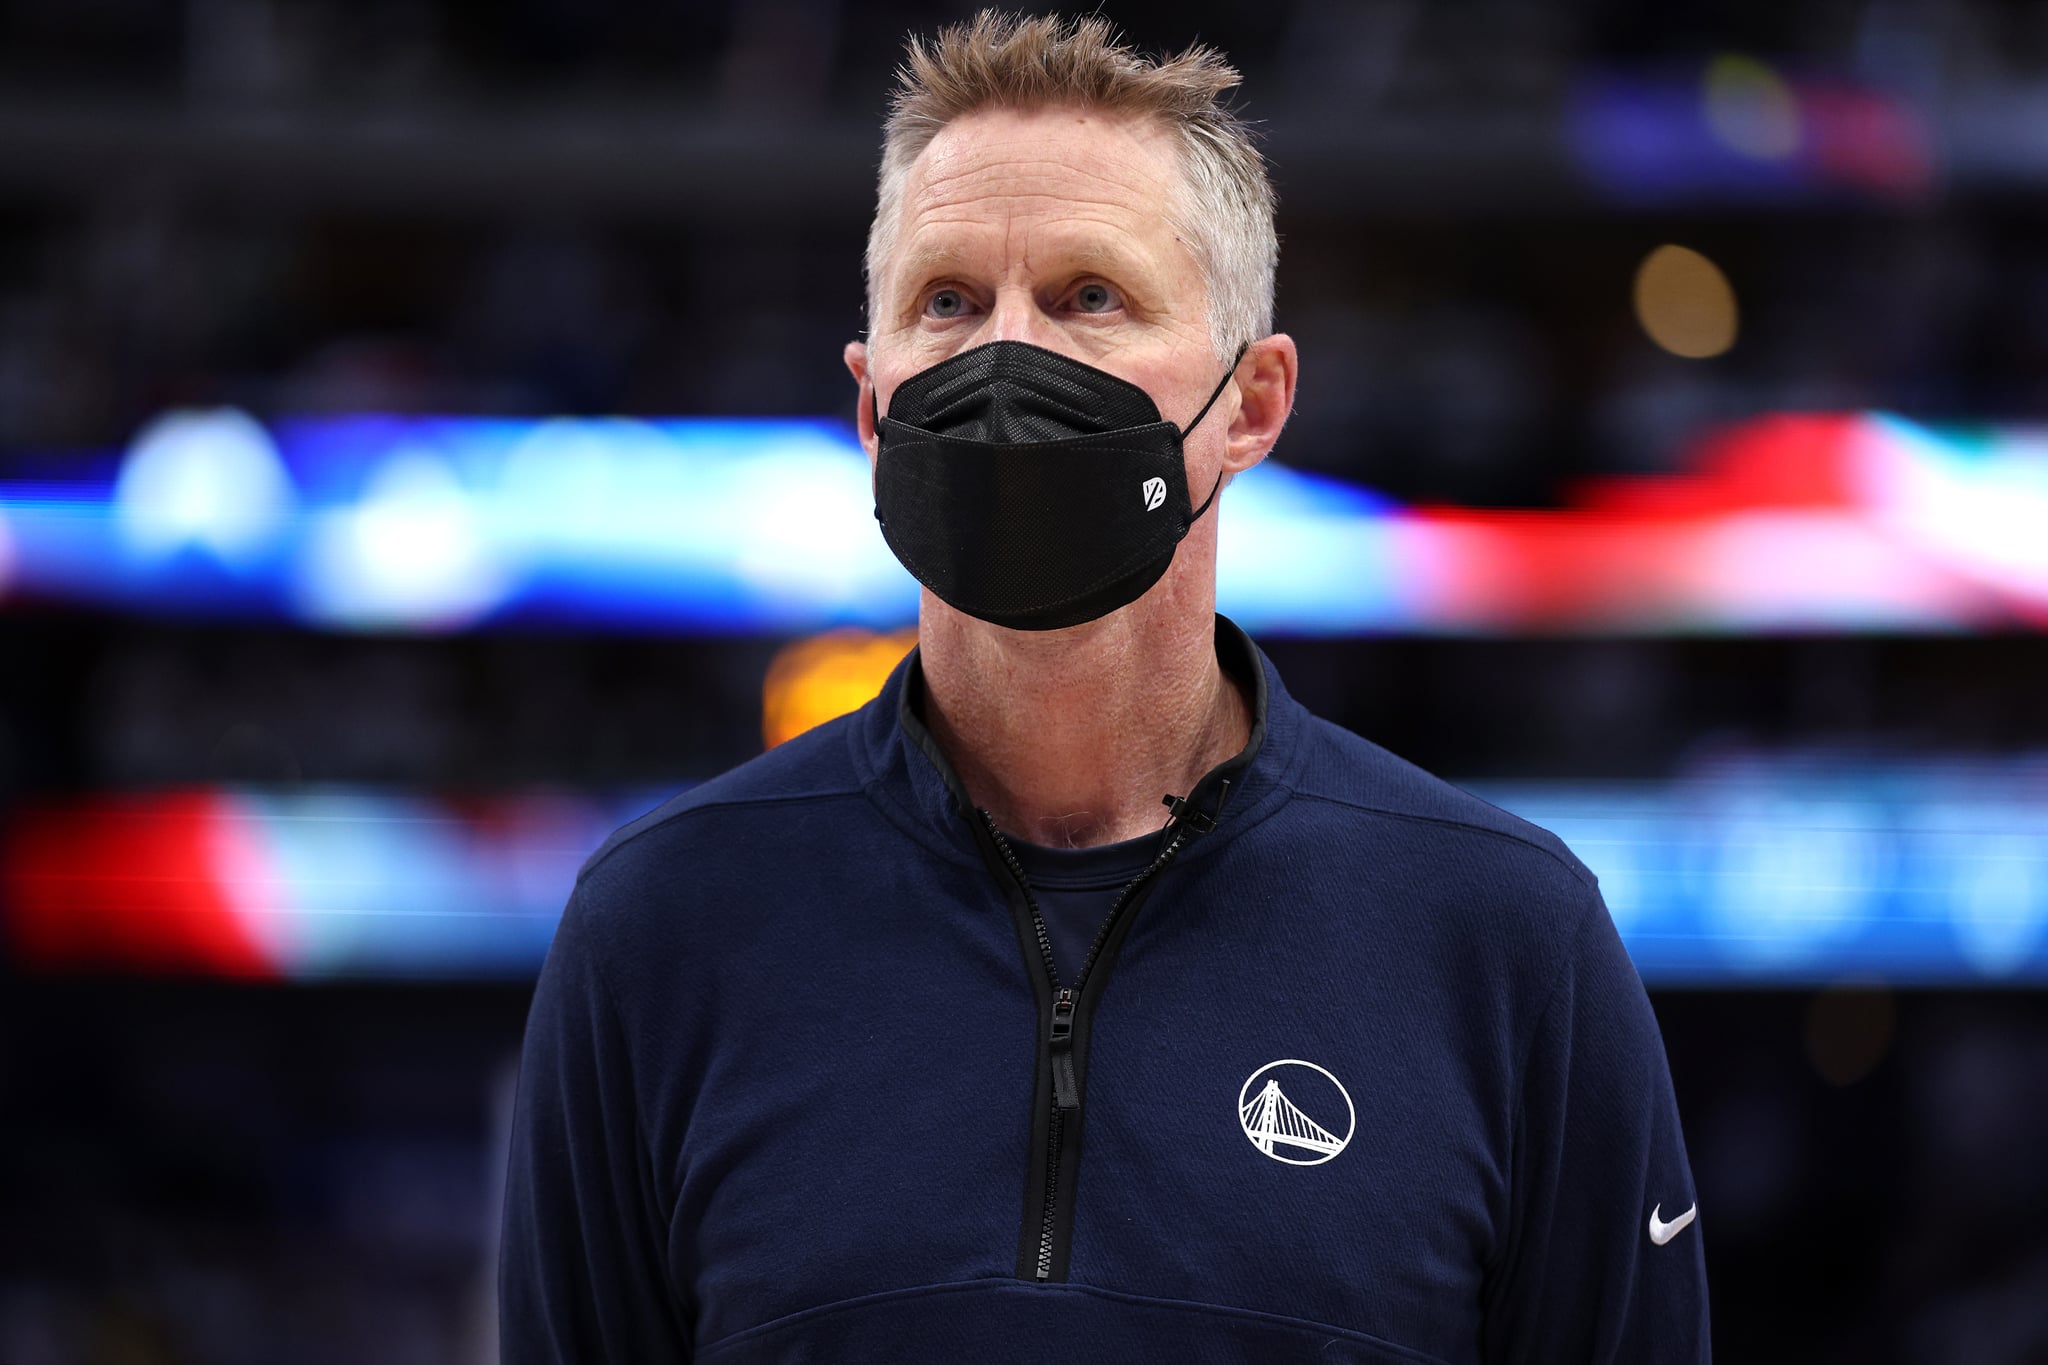 DALLAS, TEXAS - MAY 24: Head coach Steve Kerr of the Golden State Warriors looks on during the national anthem prior to Game Four of the 2022 NBA Playoffs Western Conference Finals against the Dallas Mavericks at American Airlines Center on May 24, 2022 in Dallas, Texas. NOTE TO USER: User expressly acknowledges and agrees that, by downloading and or using this photograph, User is consenting to the terms and conditions of the Getty Images License Agreement. (Photo by Tom Pennington/Getty Images)